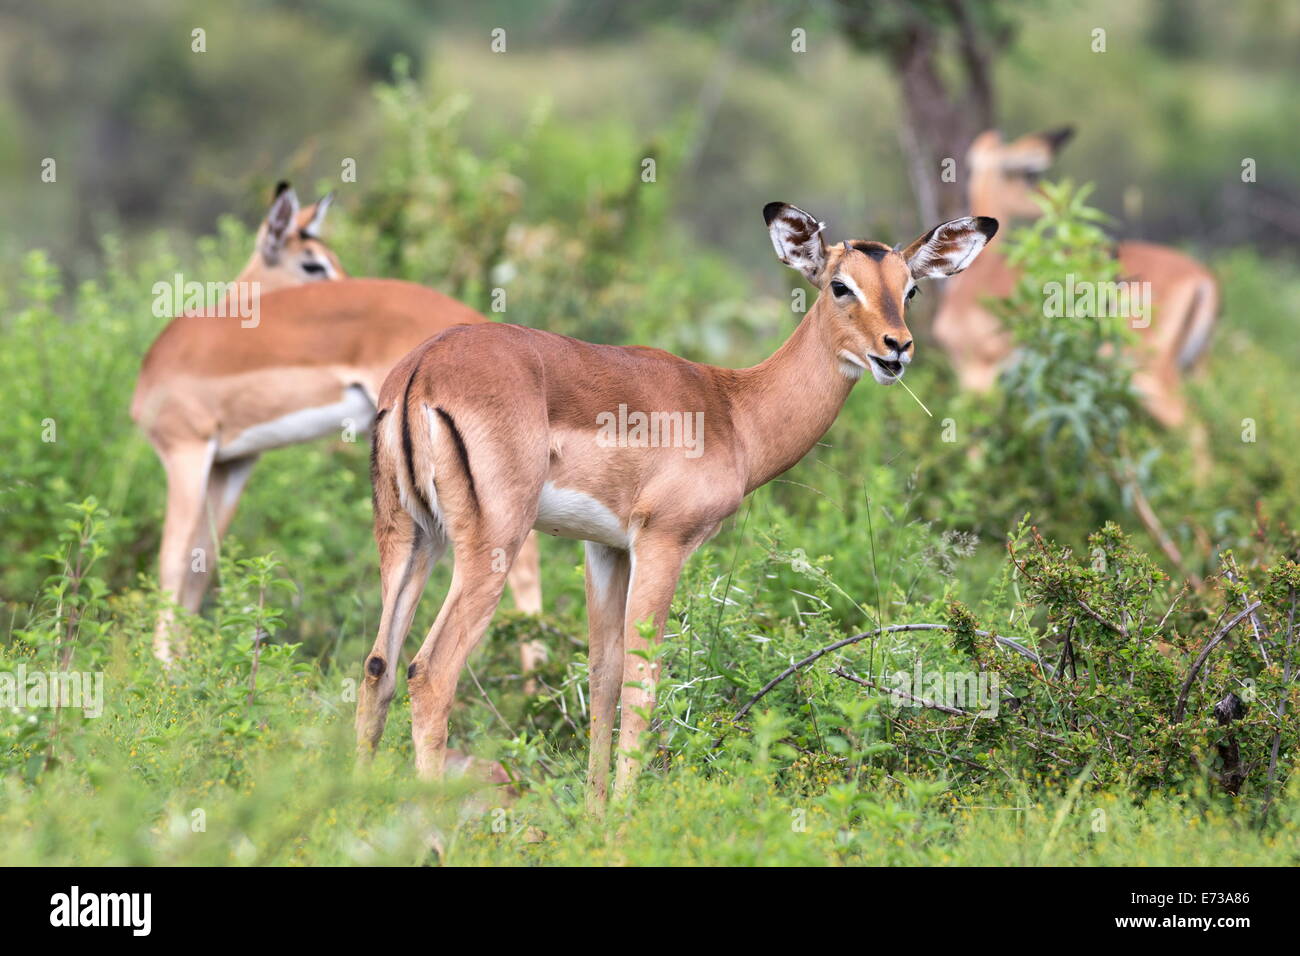 Impala (Aepyceros melampus) herd with young male feeding, Pilanesberg Game Reserve, North West province, South Africa, Africa Stock Photo